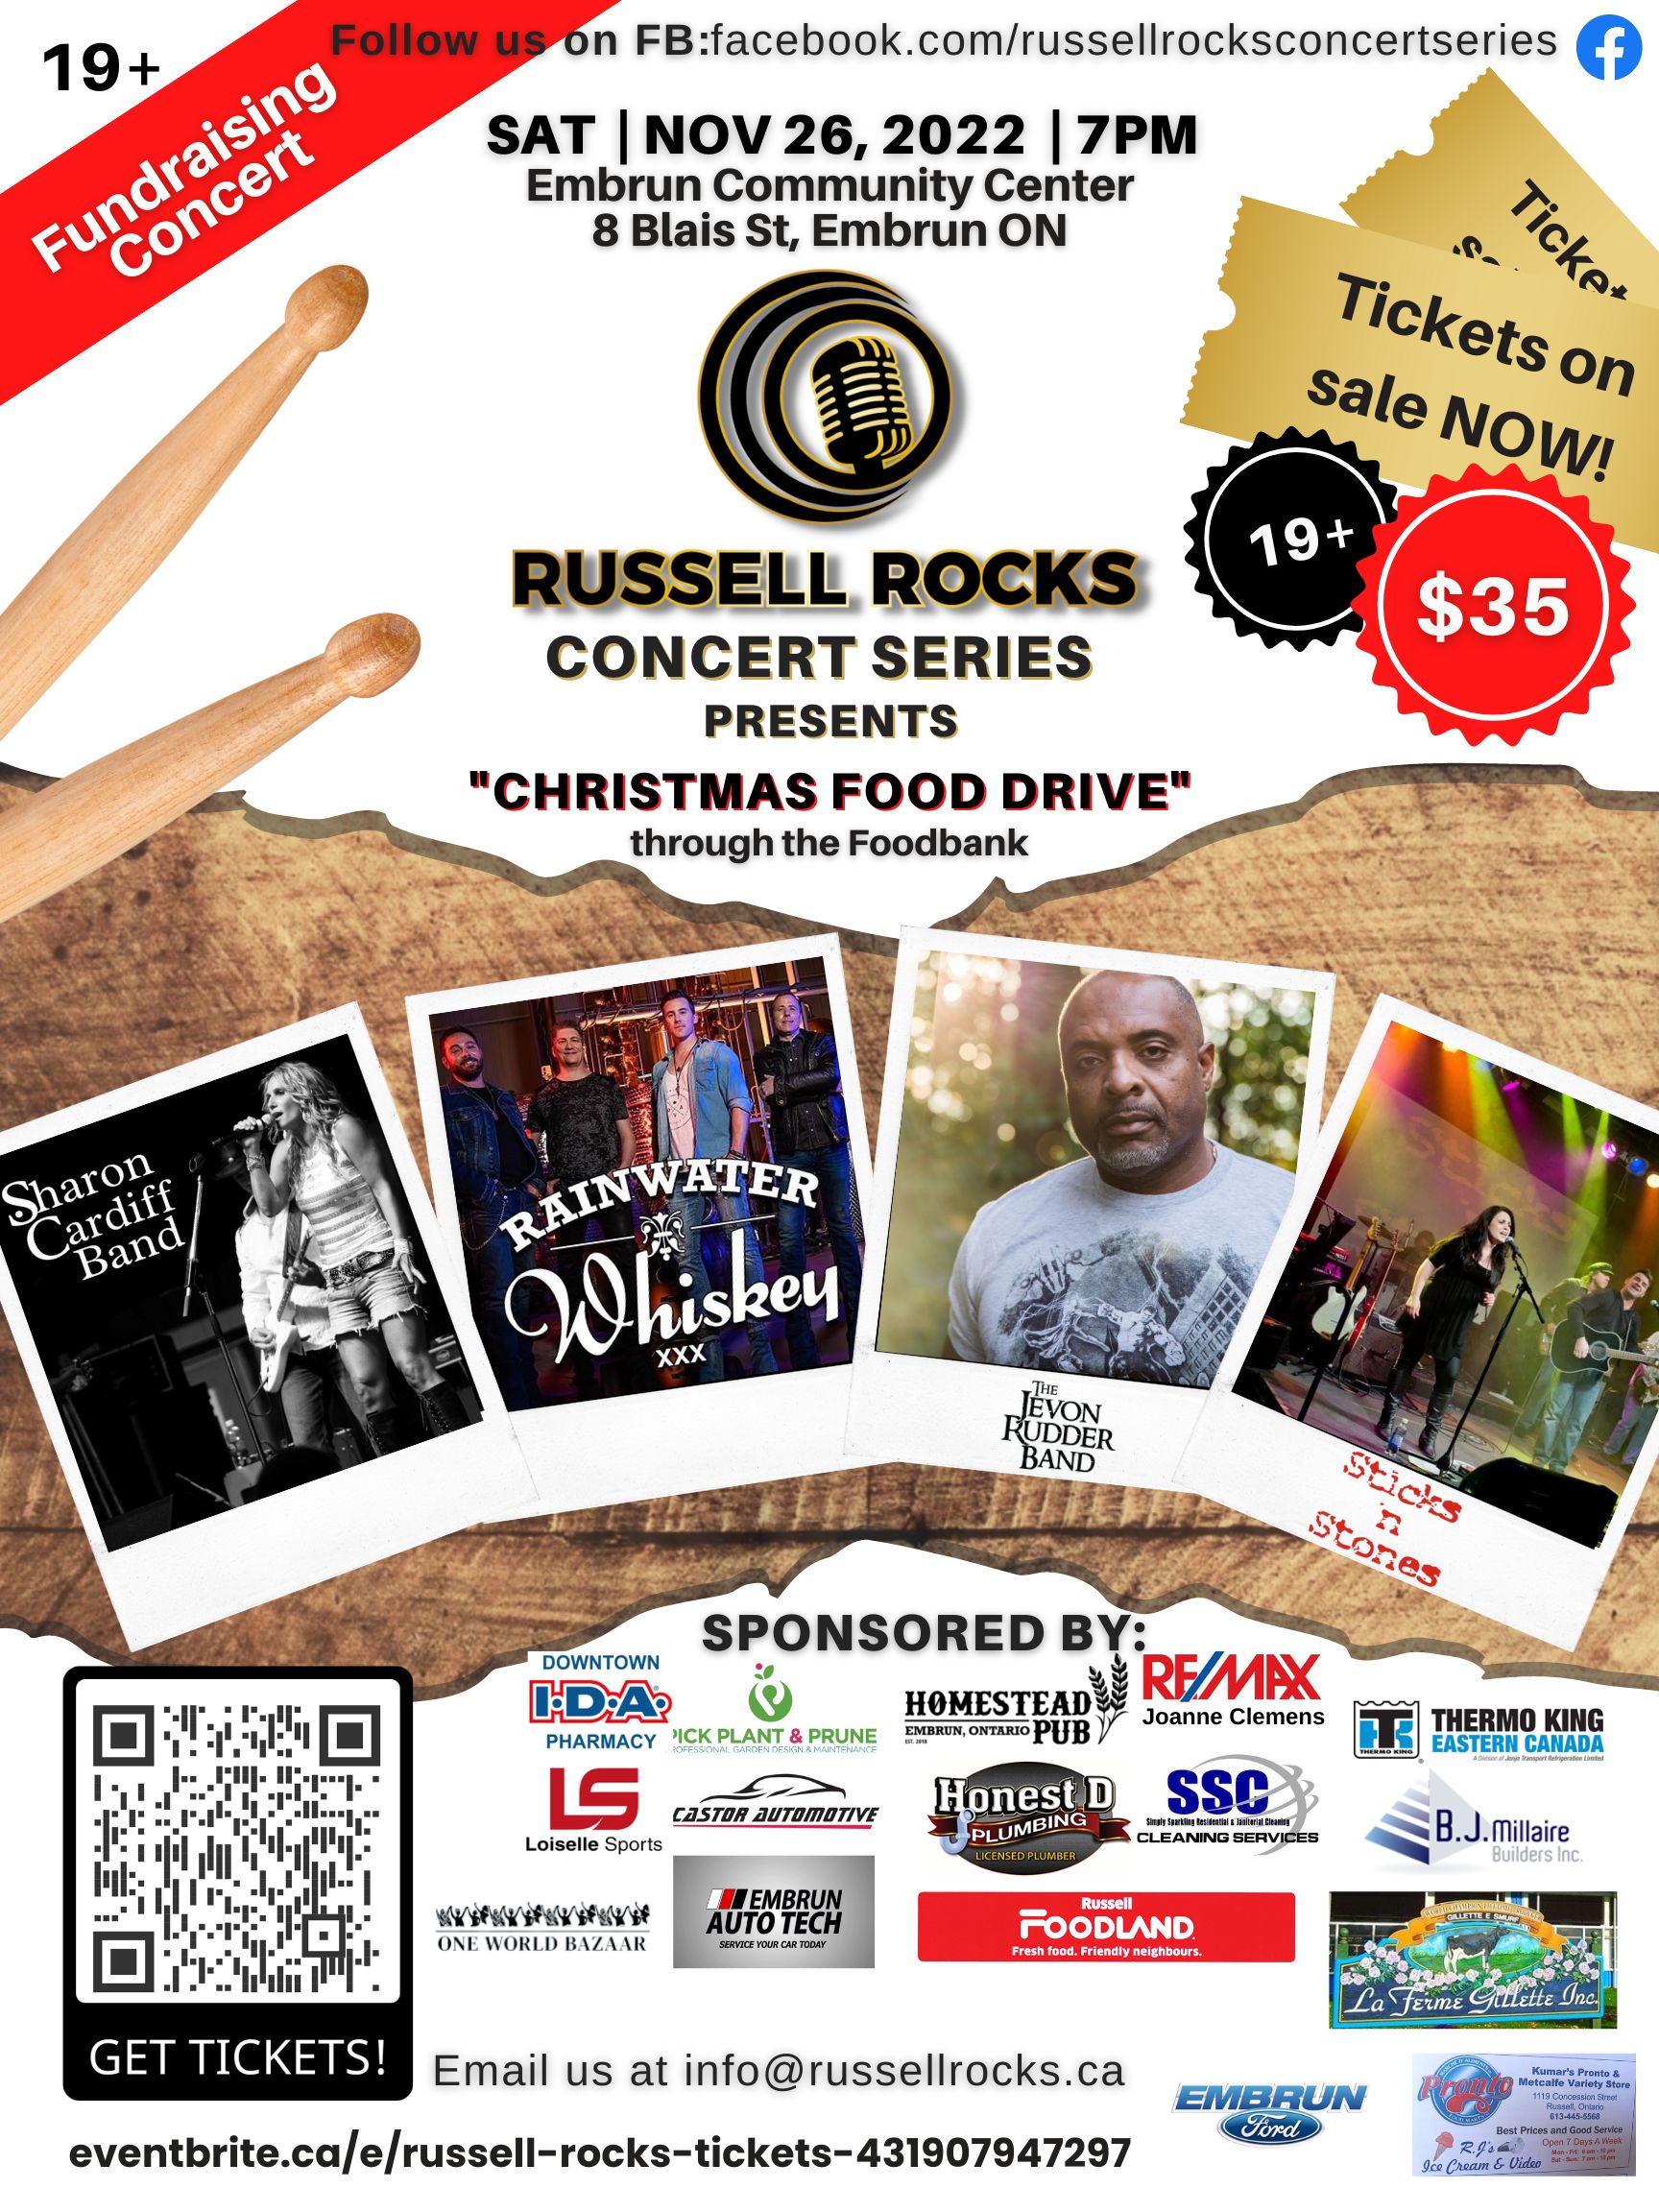 Russell Rocks Announces Christmas Food Drive Concert Series